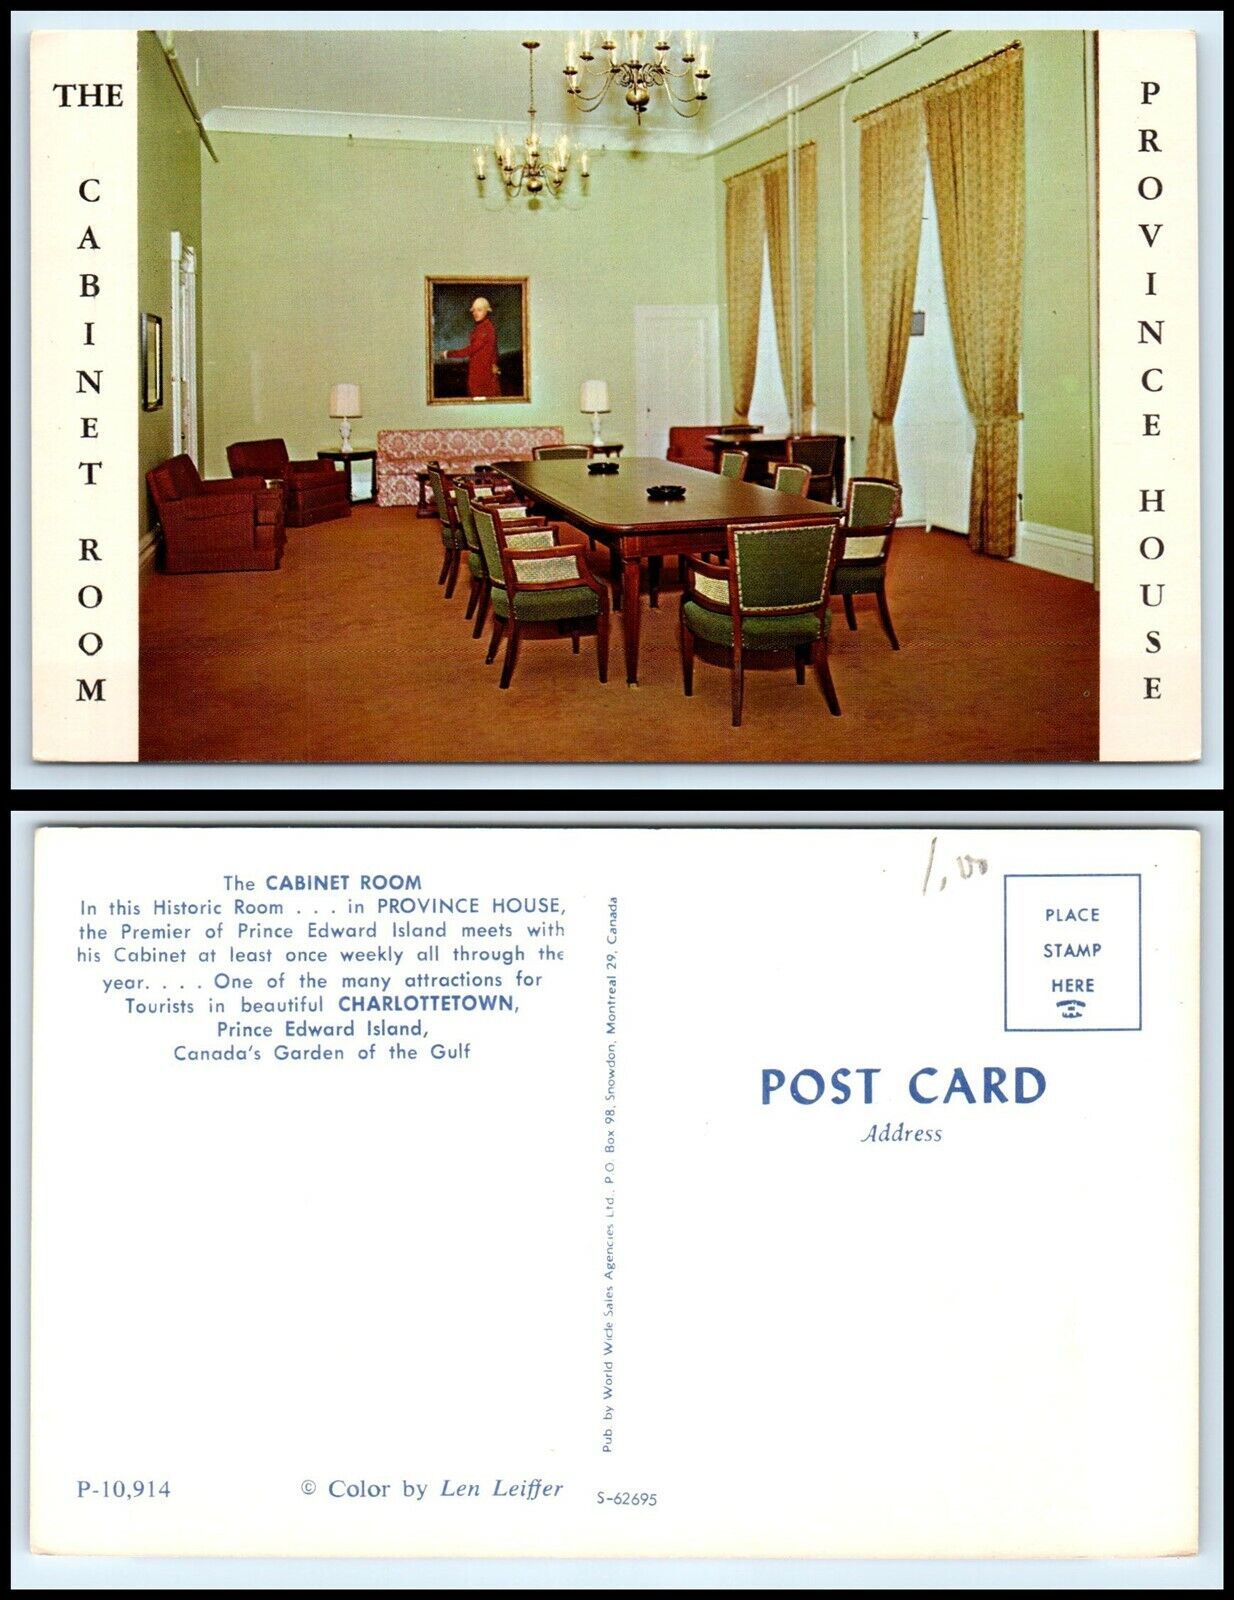 Primary image for CANADA Postcard - Prince Edward Island, Charlottetown, The Cabinet Room FE